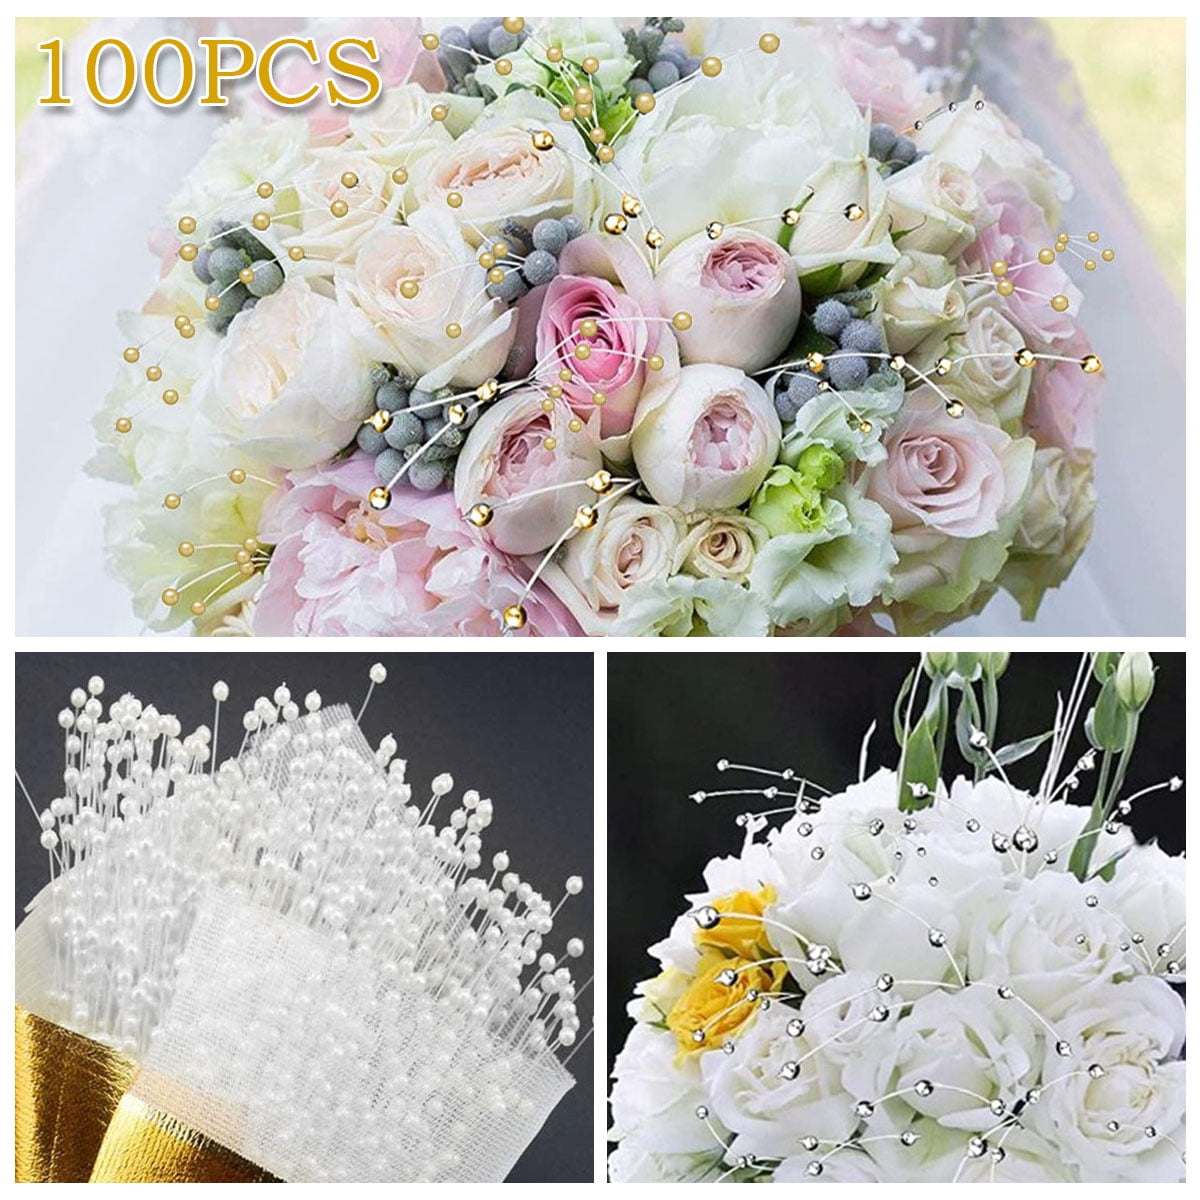 U-N KIKEEP 4mm Pearls String Wedding Bouquet Floral Beaded Sticks Pearl Sticks Beading on Wire Stems for DIY Garland Bridal Wedding Pearl Bouquet 100Pack White, 100 